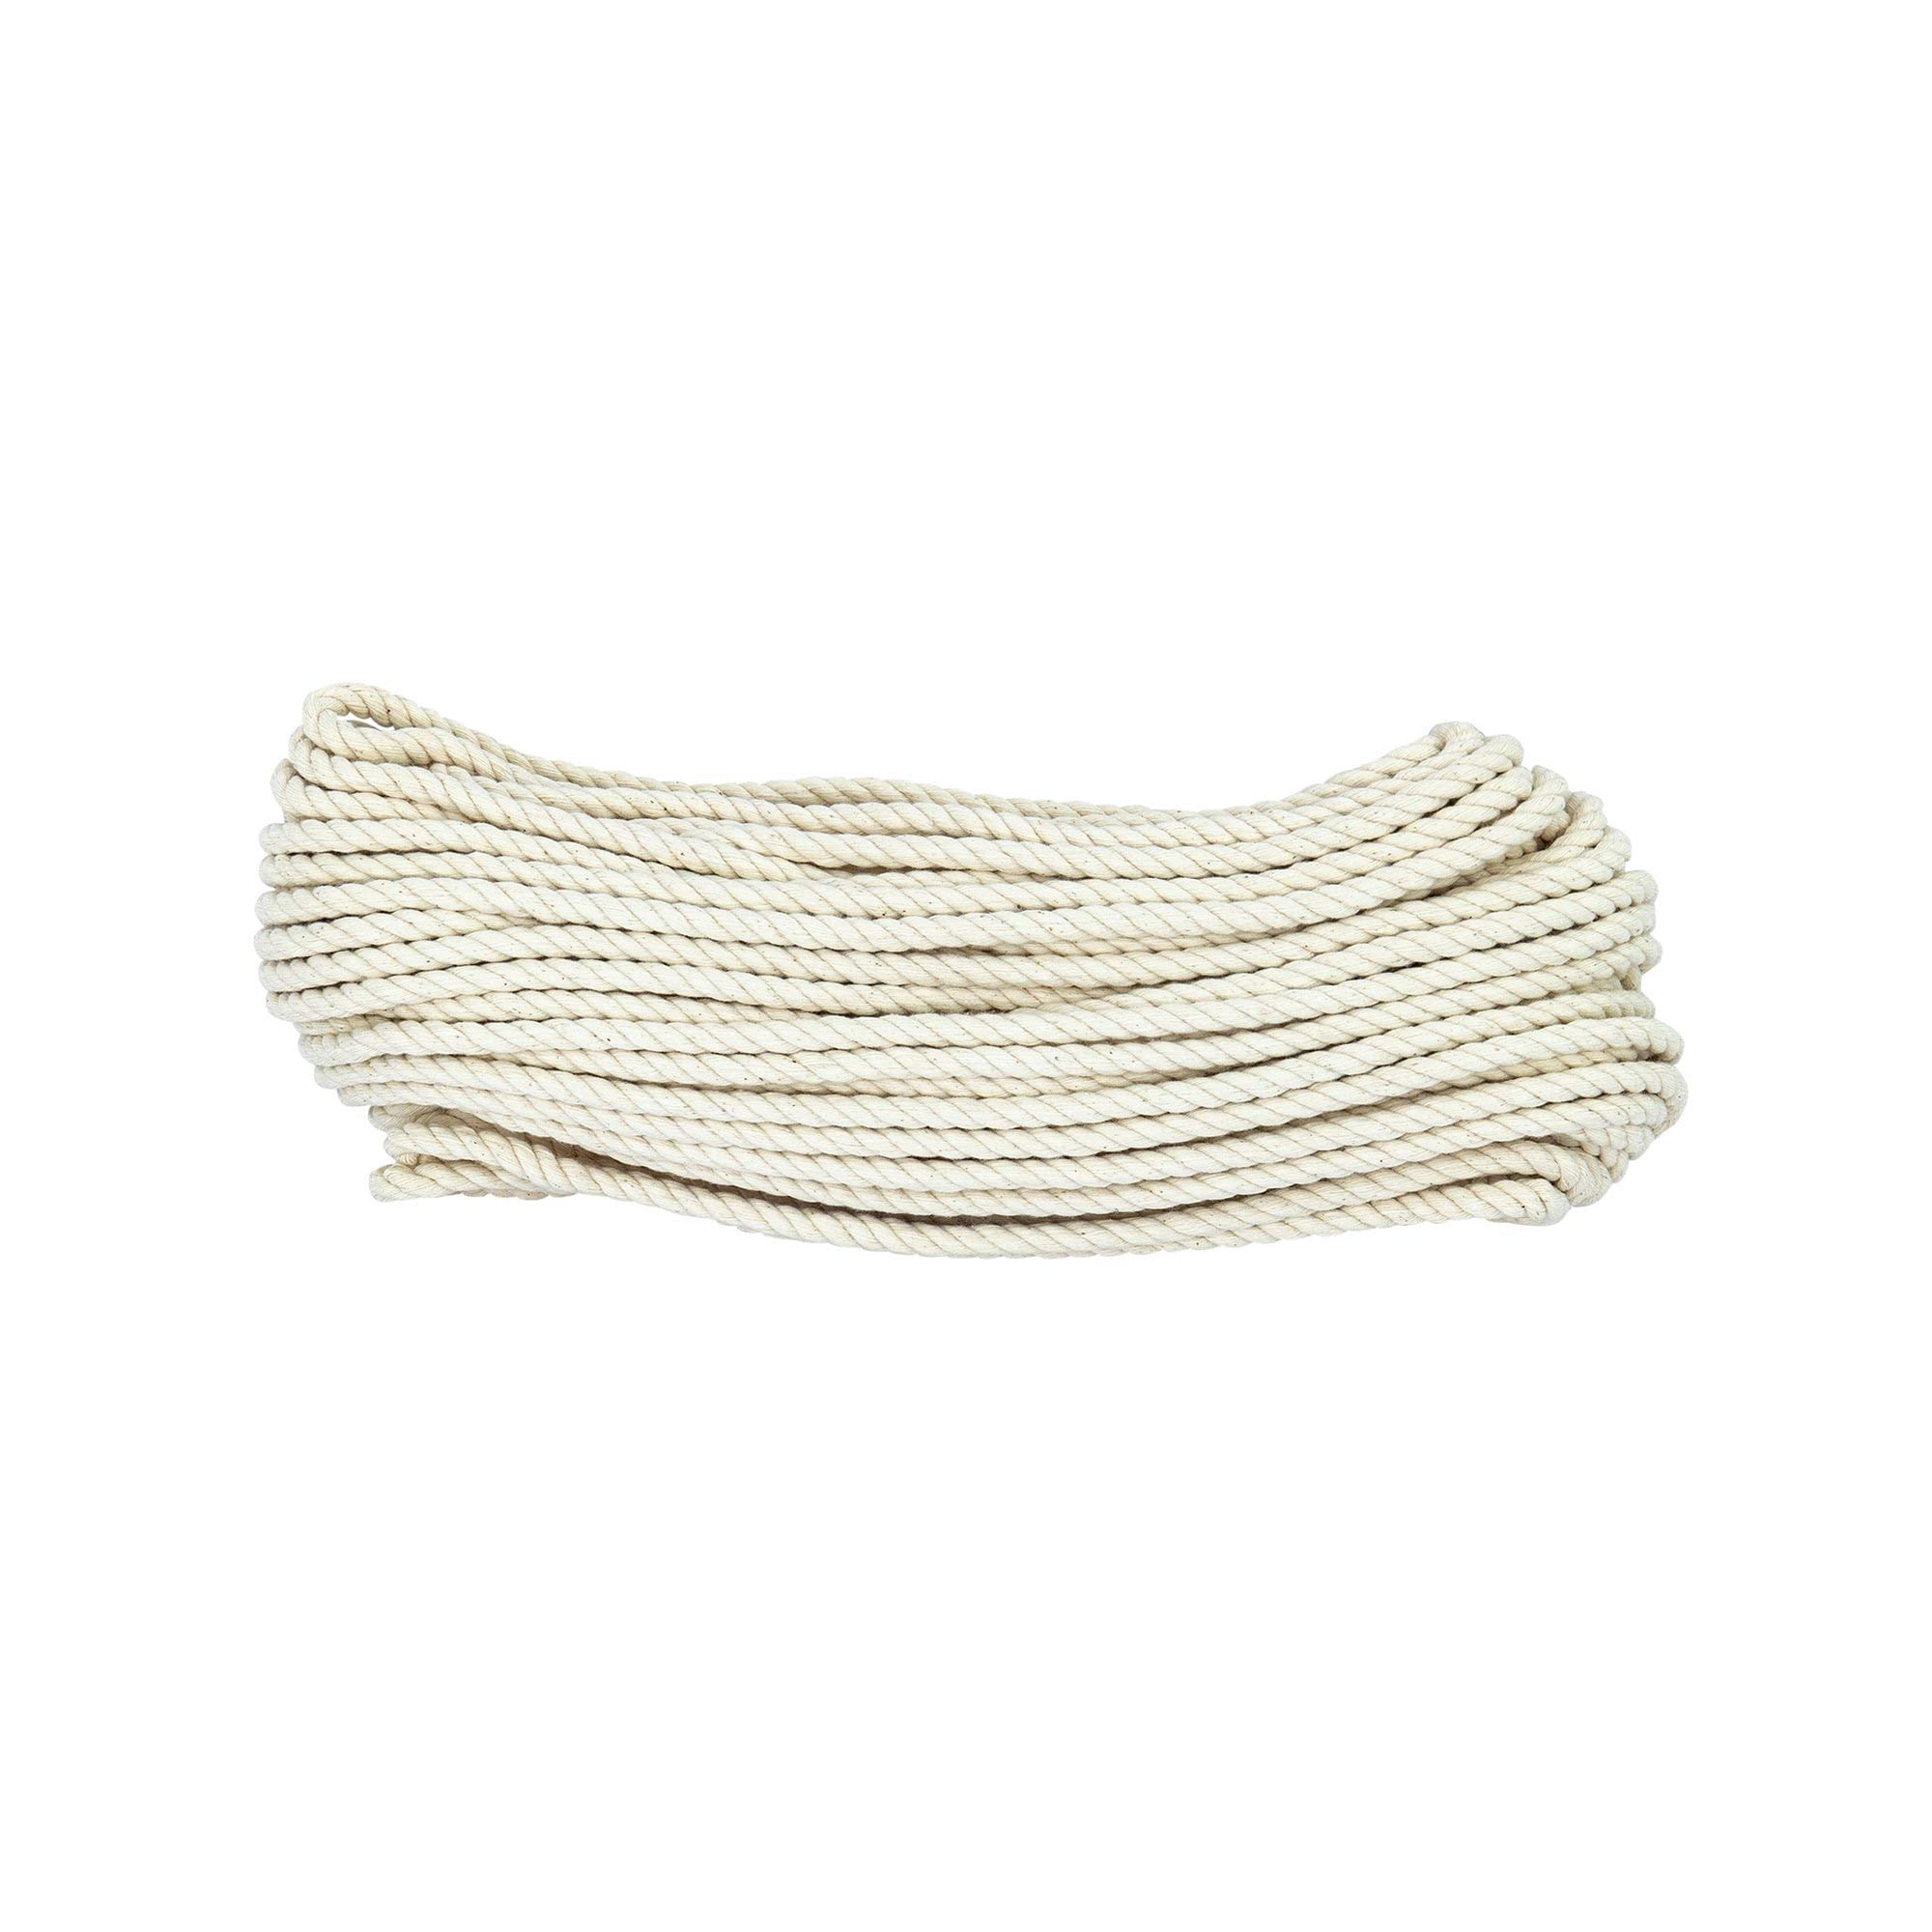 SGT KNOTS Twisted 100% Cotton Rope for DIY Projects, Crafts